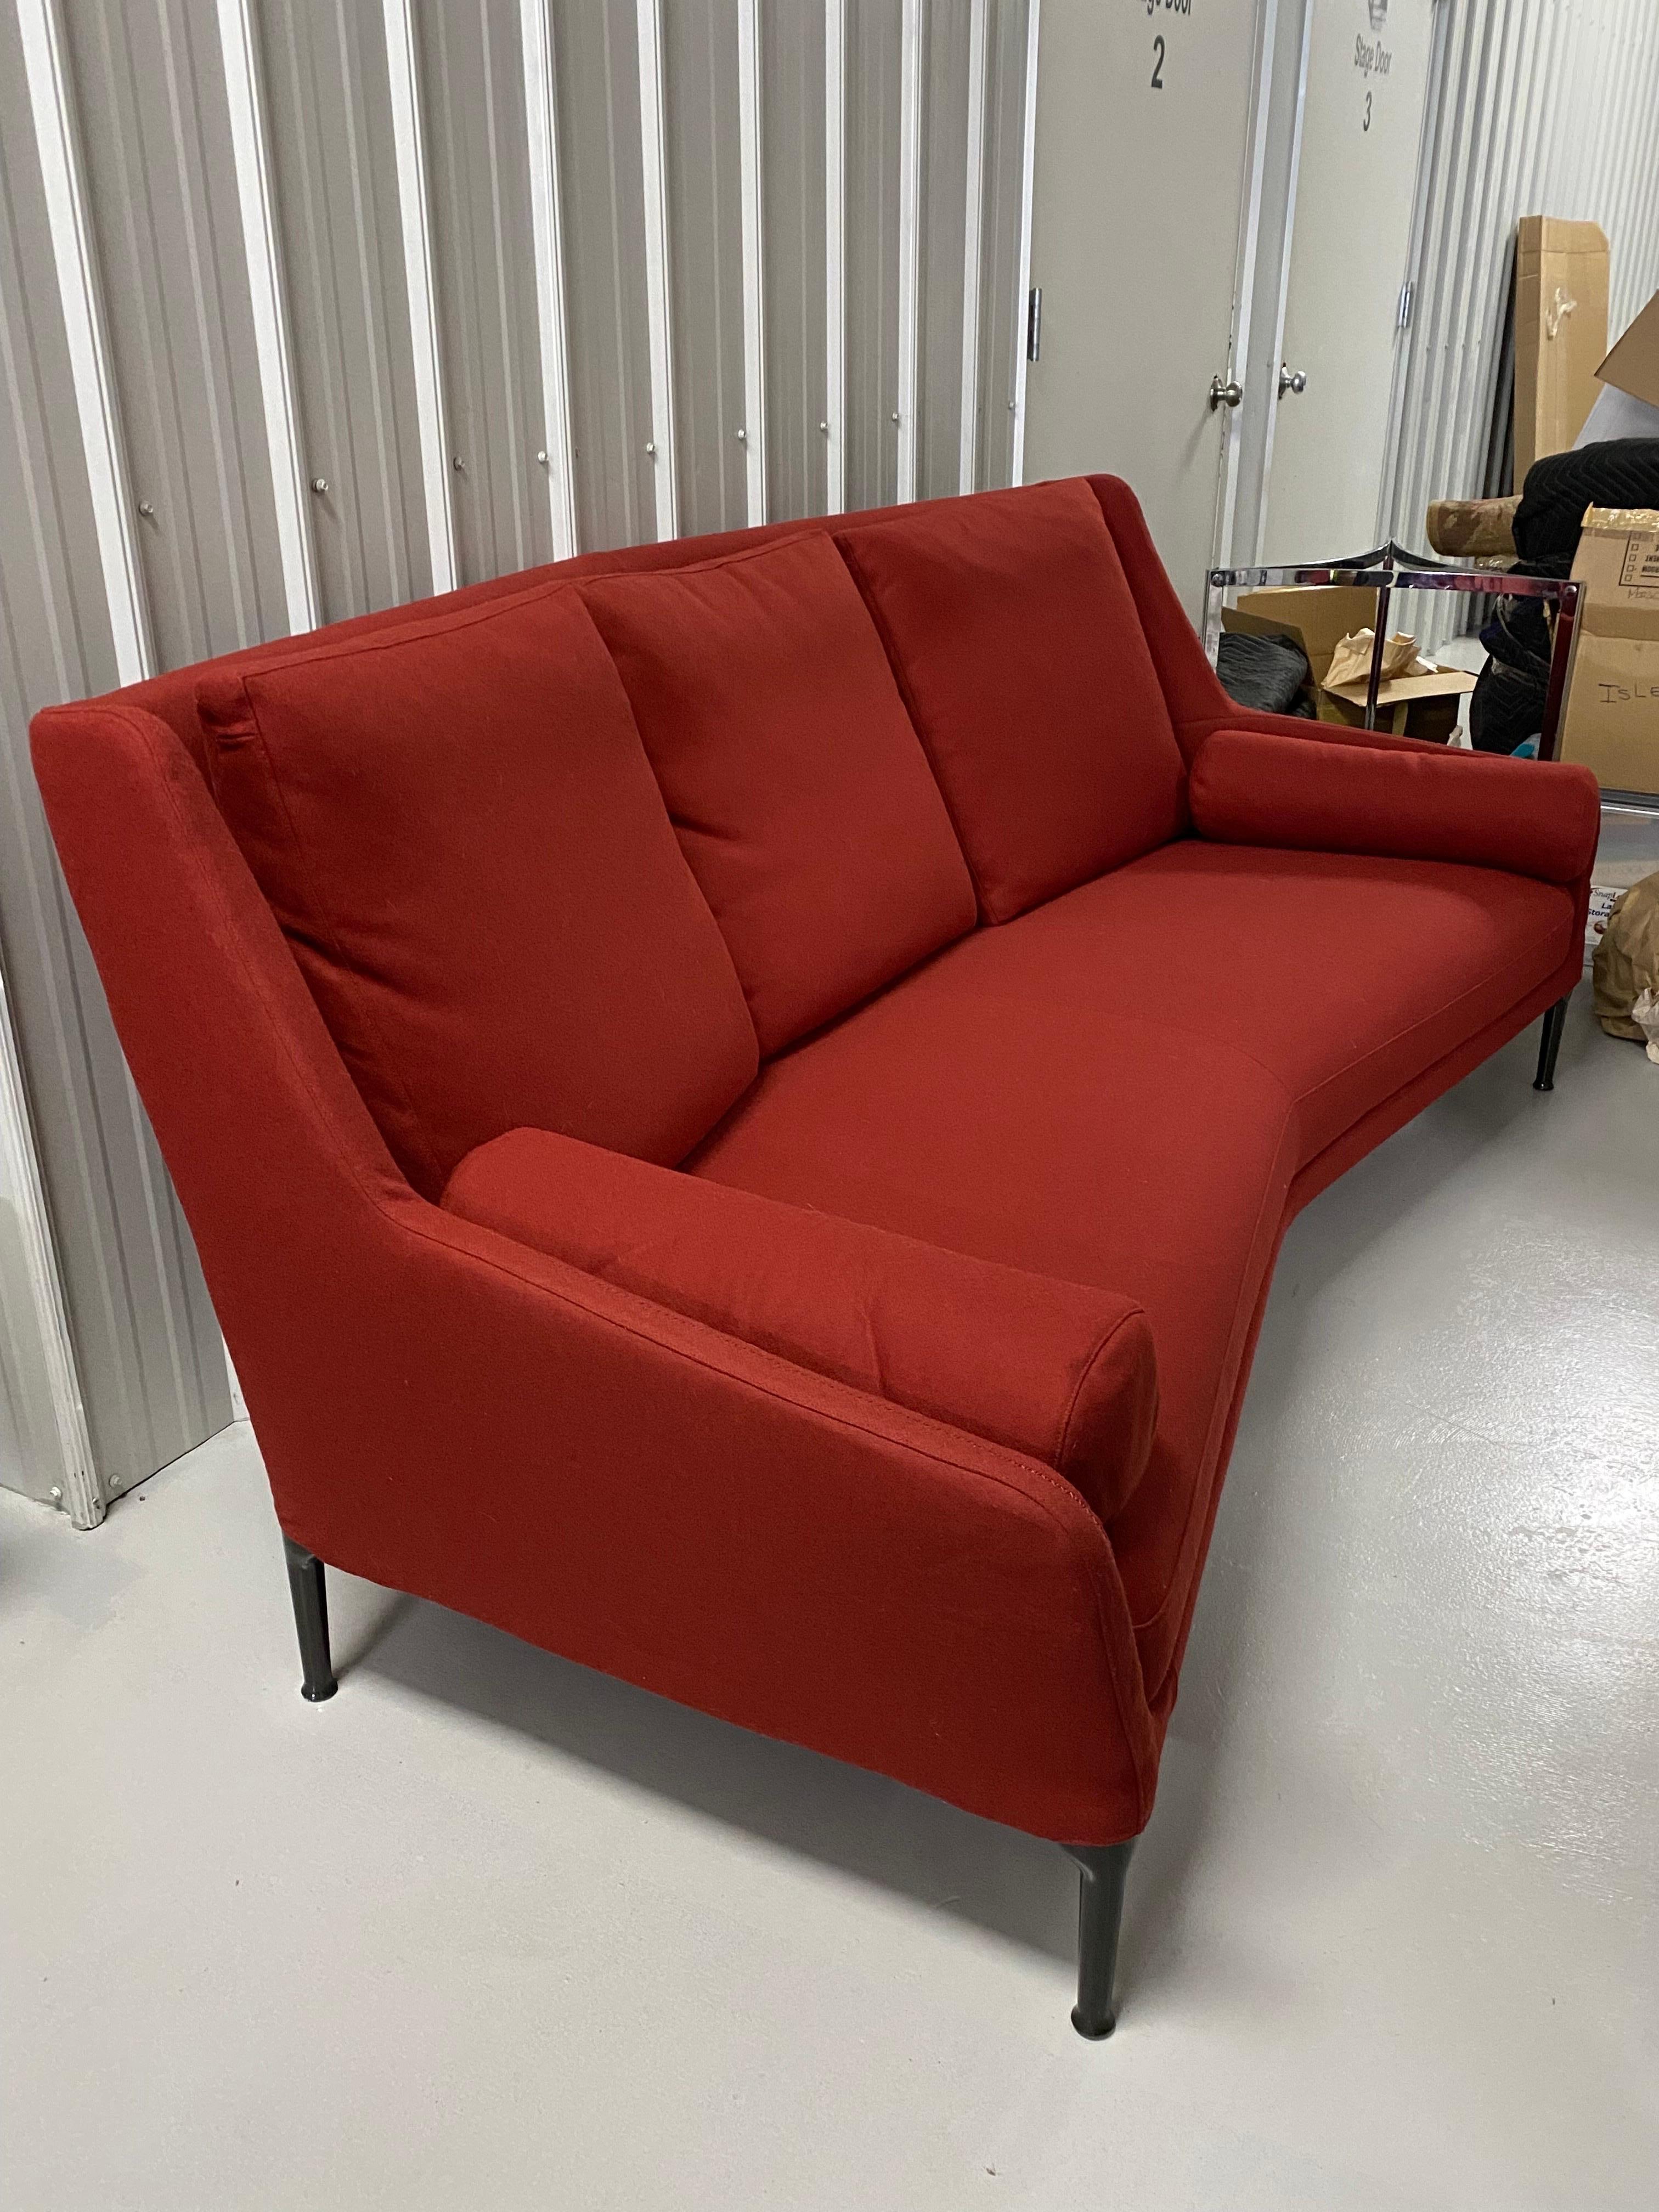 B & B Italia Édouard Three-Seater Sofa by Antionio Citterio
The Édouard sofas have been designed to enhance comfort with a wide seat and a high backrest, this one is fitted with one headrest, studied to ensure efficient and excellent ergonomic